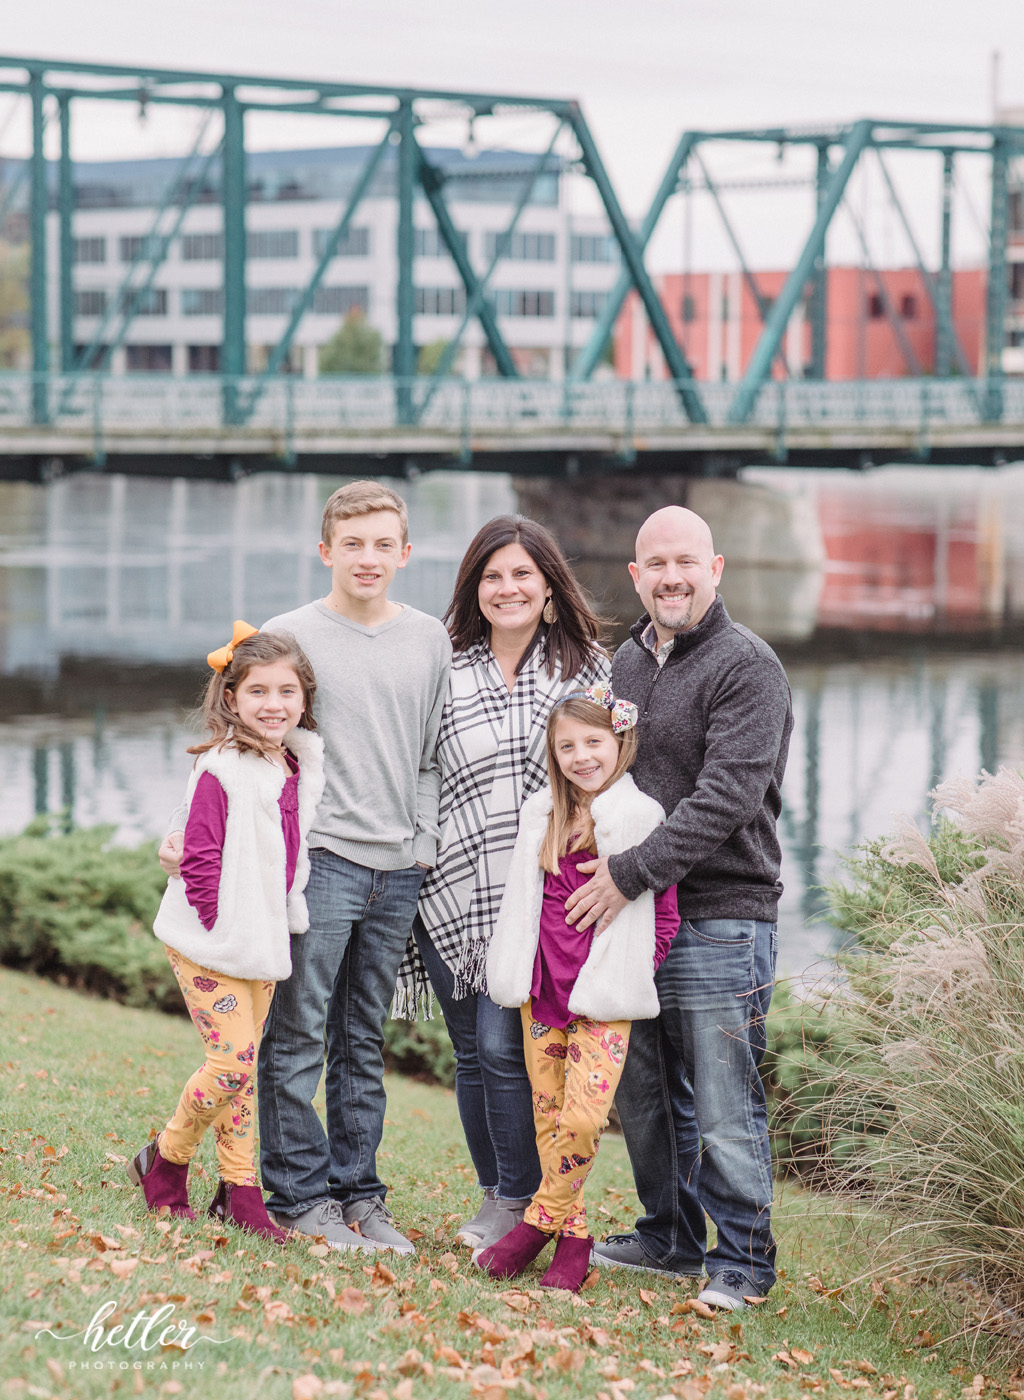 Downtown Grand Rapids fall family photos in front of the Sixth Street Bridge